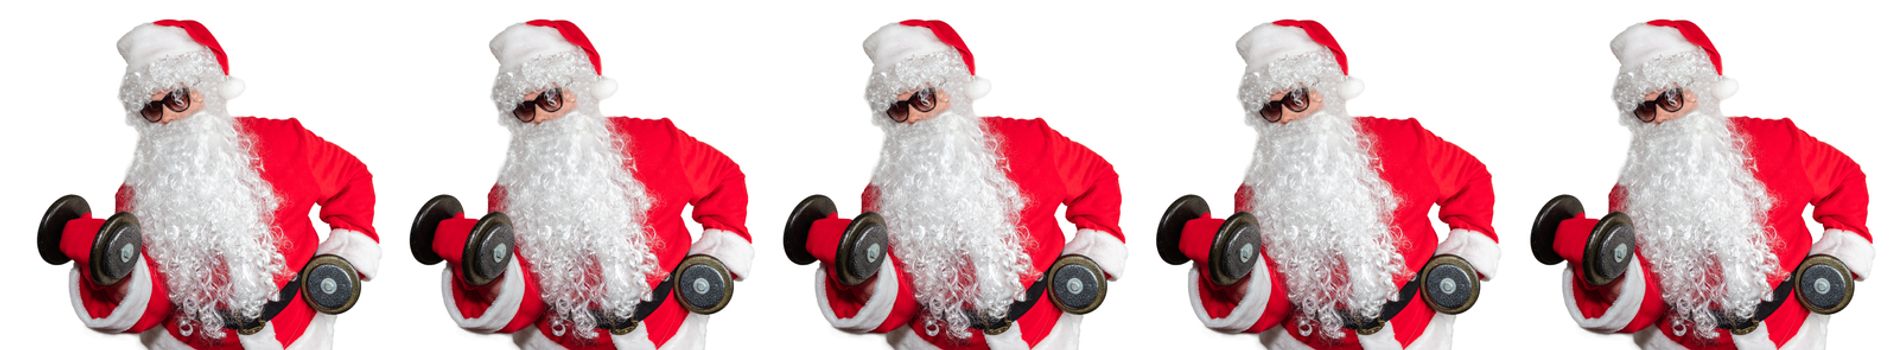 Santa Clauses working out, lifting dumbbells and doing bicep curls. Pattern style, Isolated on white background. Sport, fitness, bodybuilding conept. Banner size, copy space.